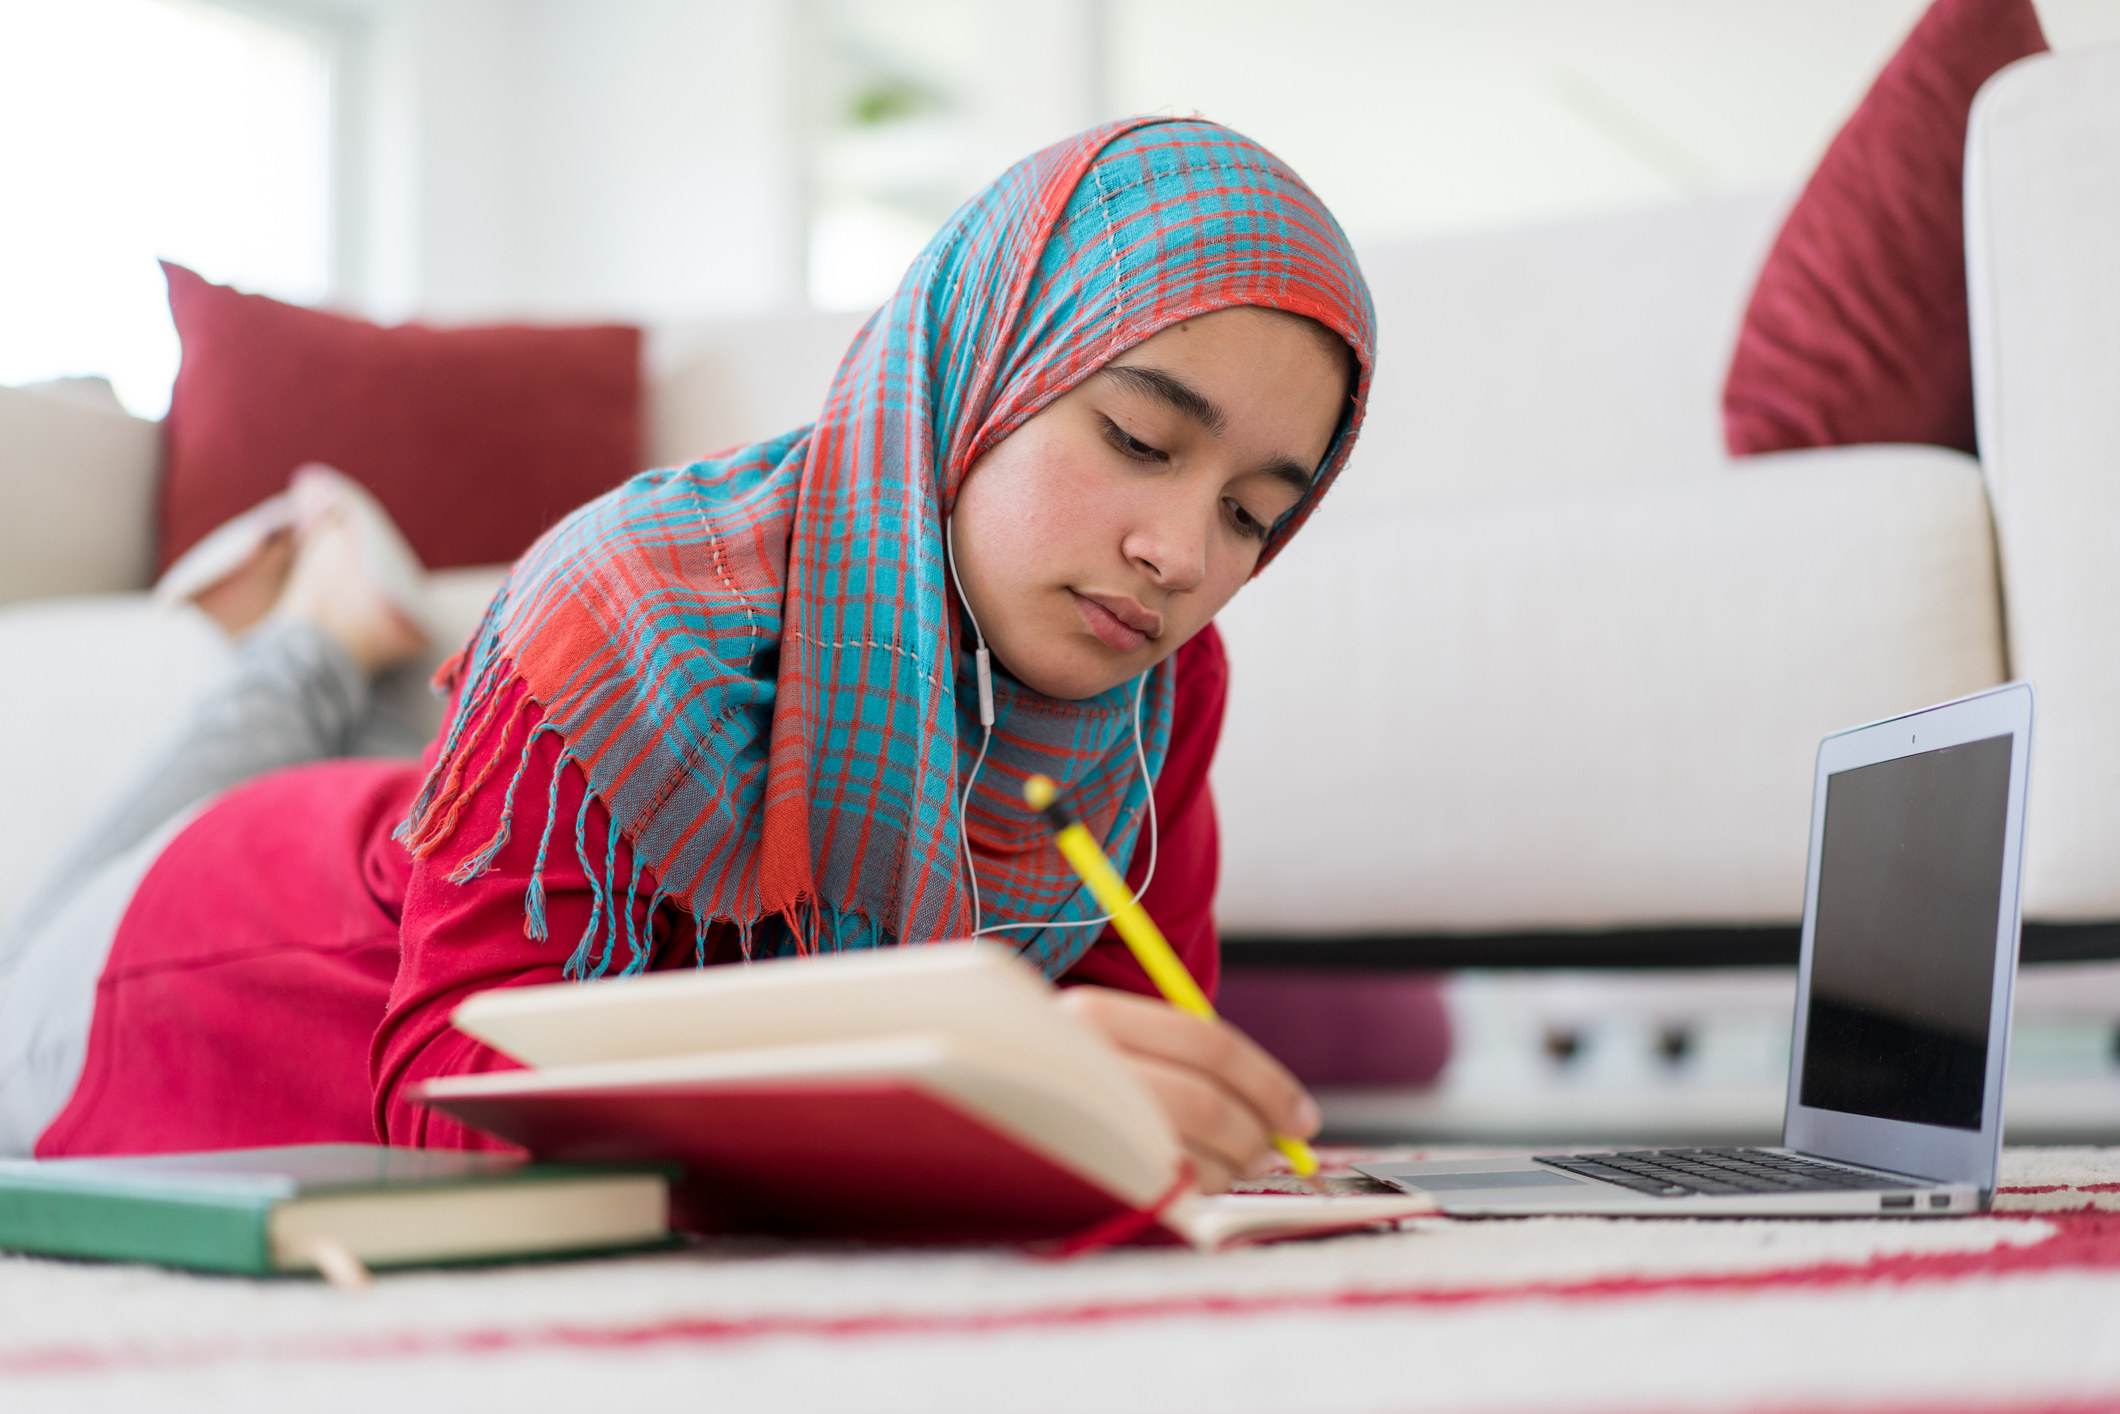 A Middle Eastern teenage girl with hijab studying at home